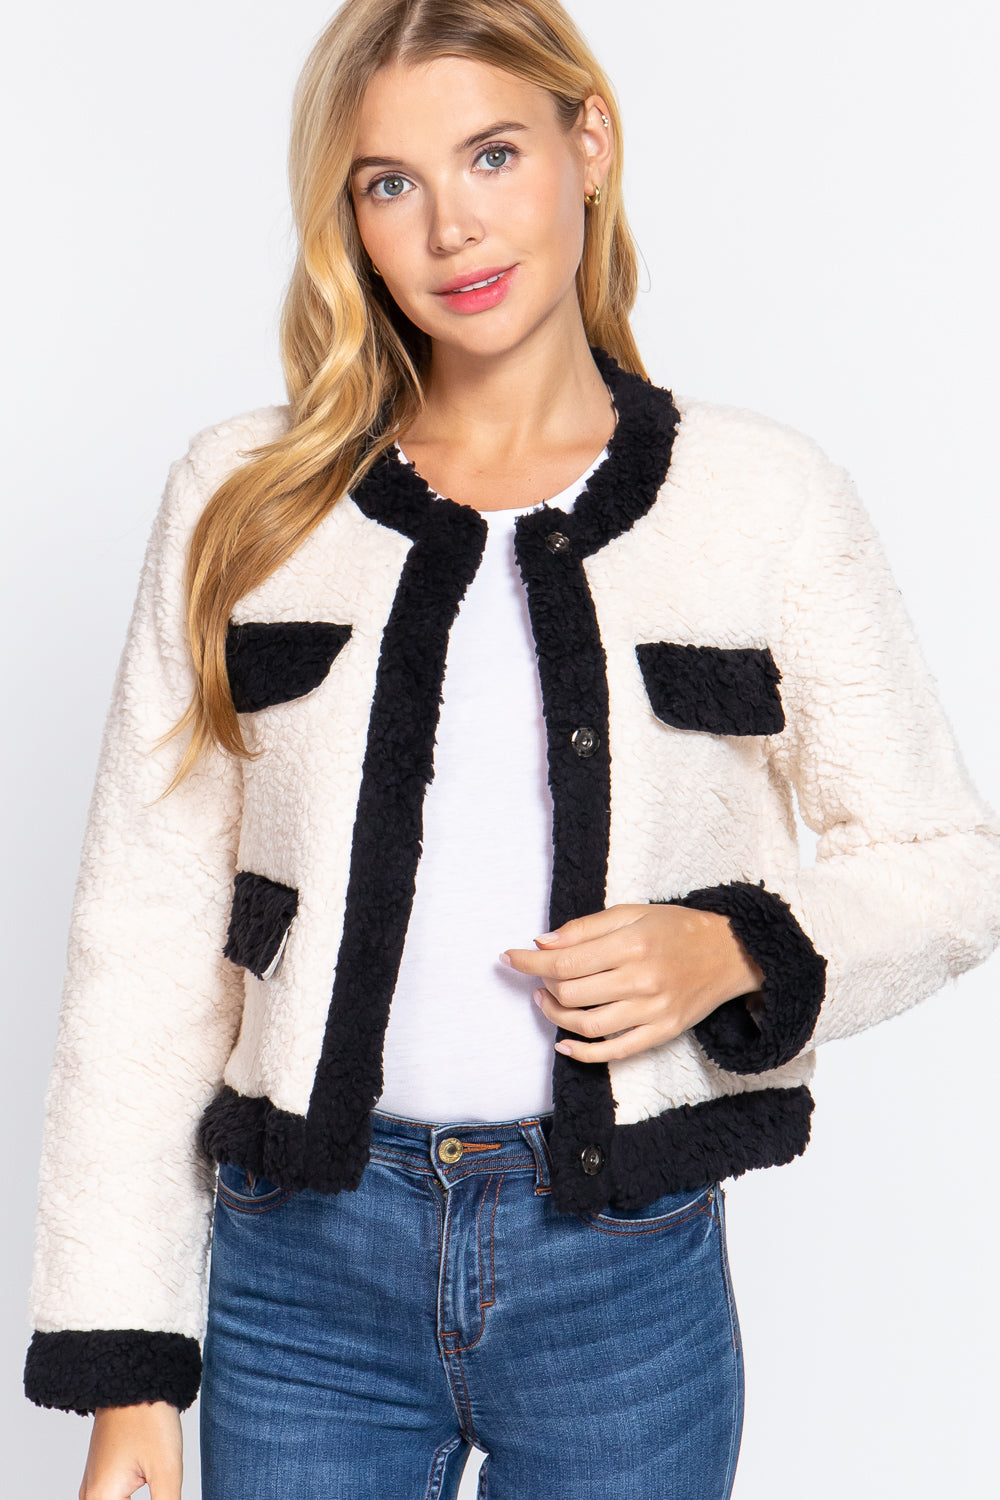 - Long Sleeve Pocket Detail Faux Fur Jacket - 3 colors - Ships from The US - womens jacket at TFC&H Co.